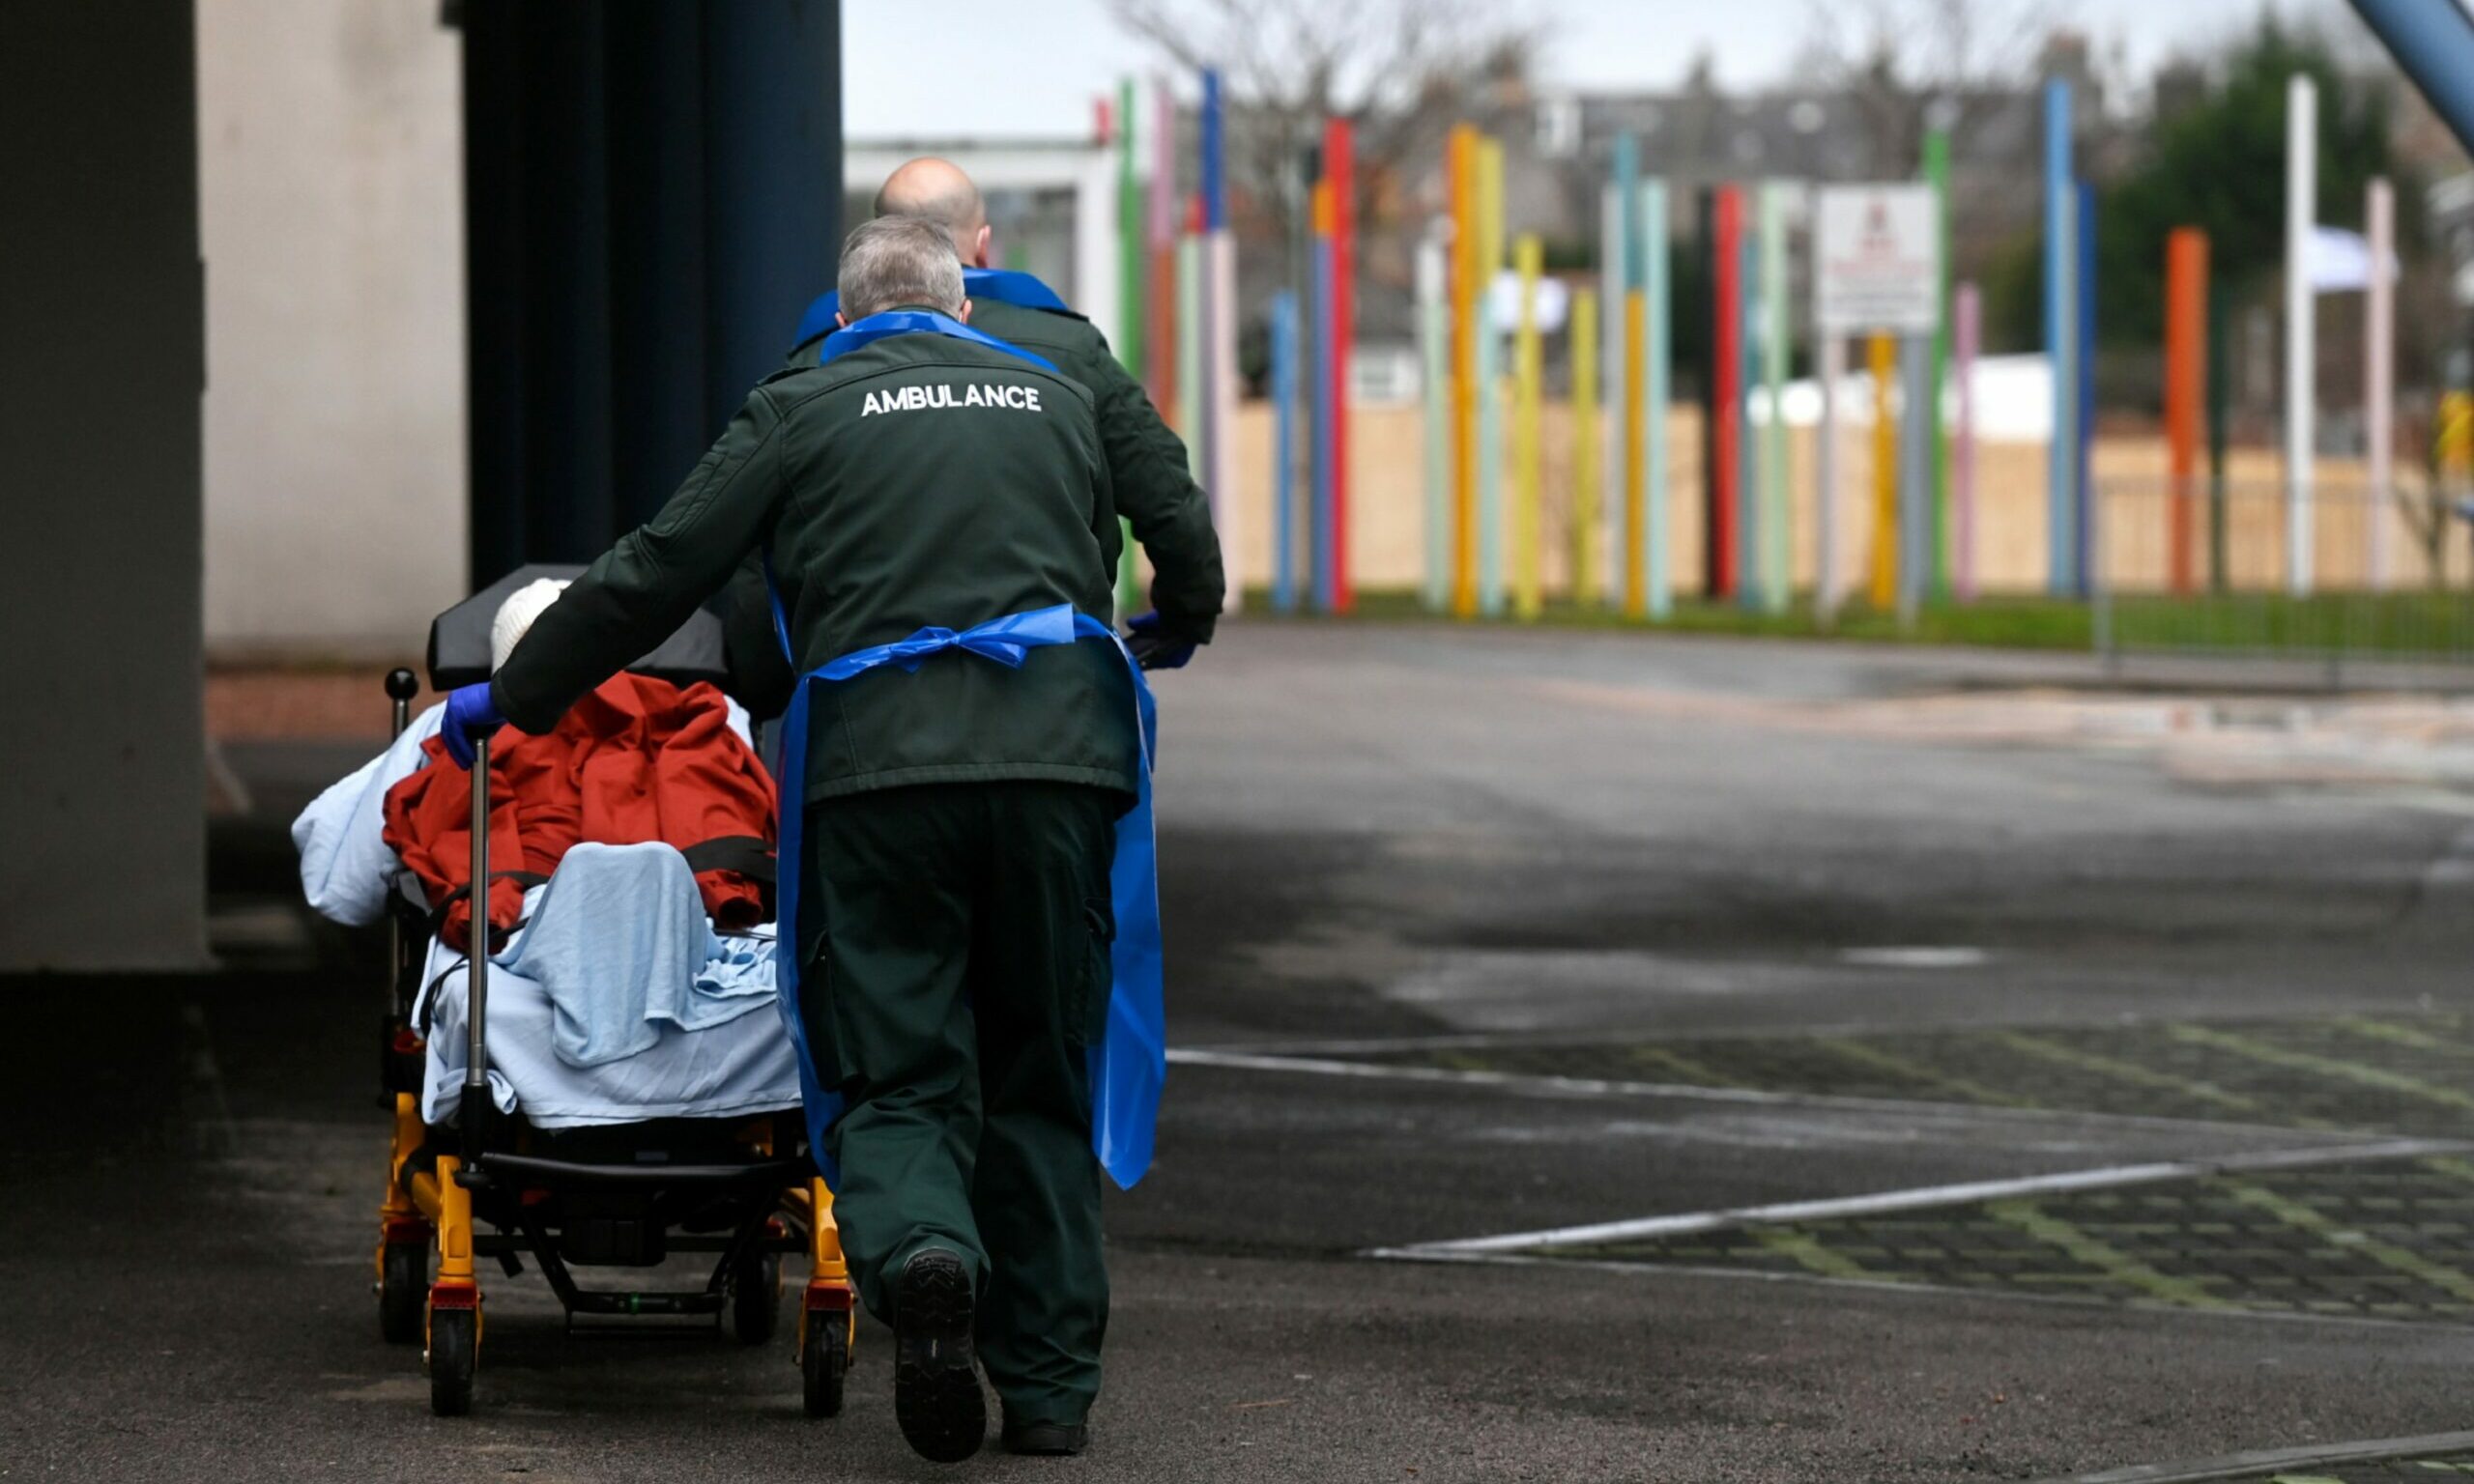 An ambulance technician pushes a patient in a wheelchair outside Aberdeen Royal Infirmary